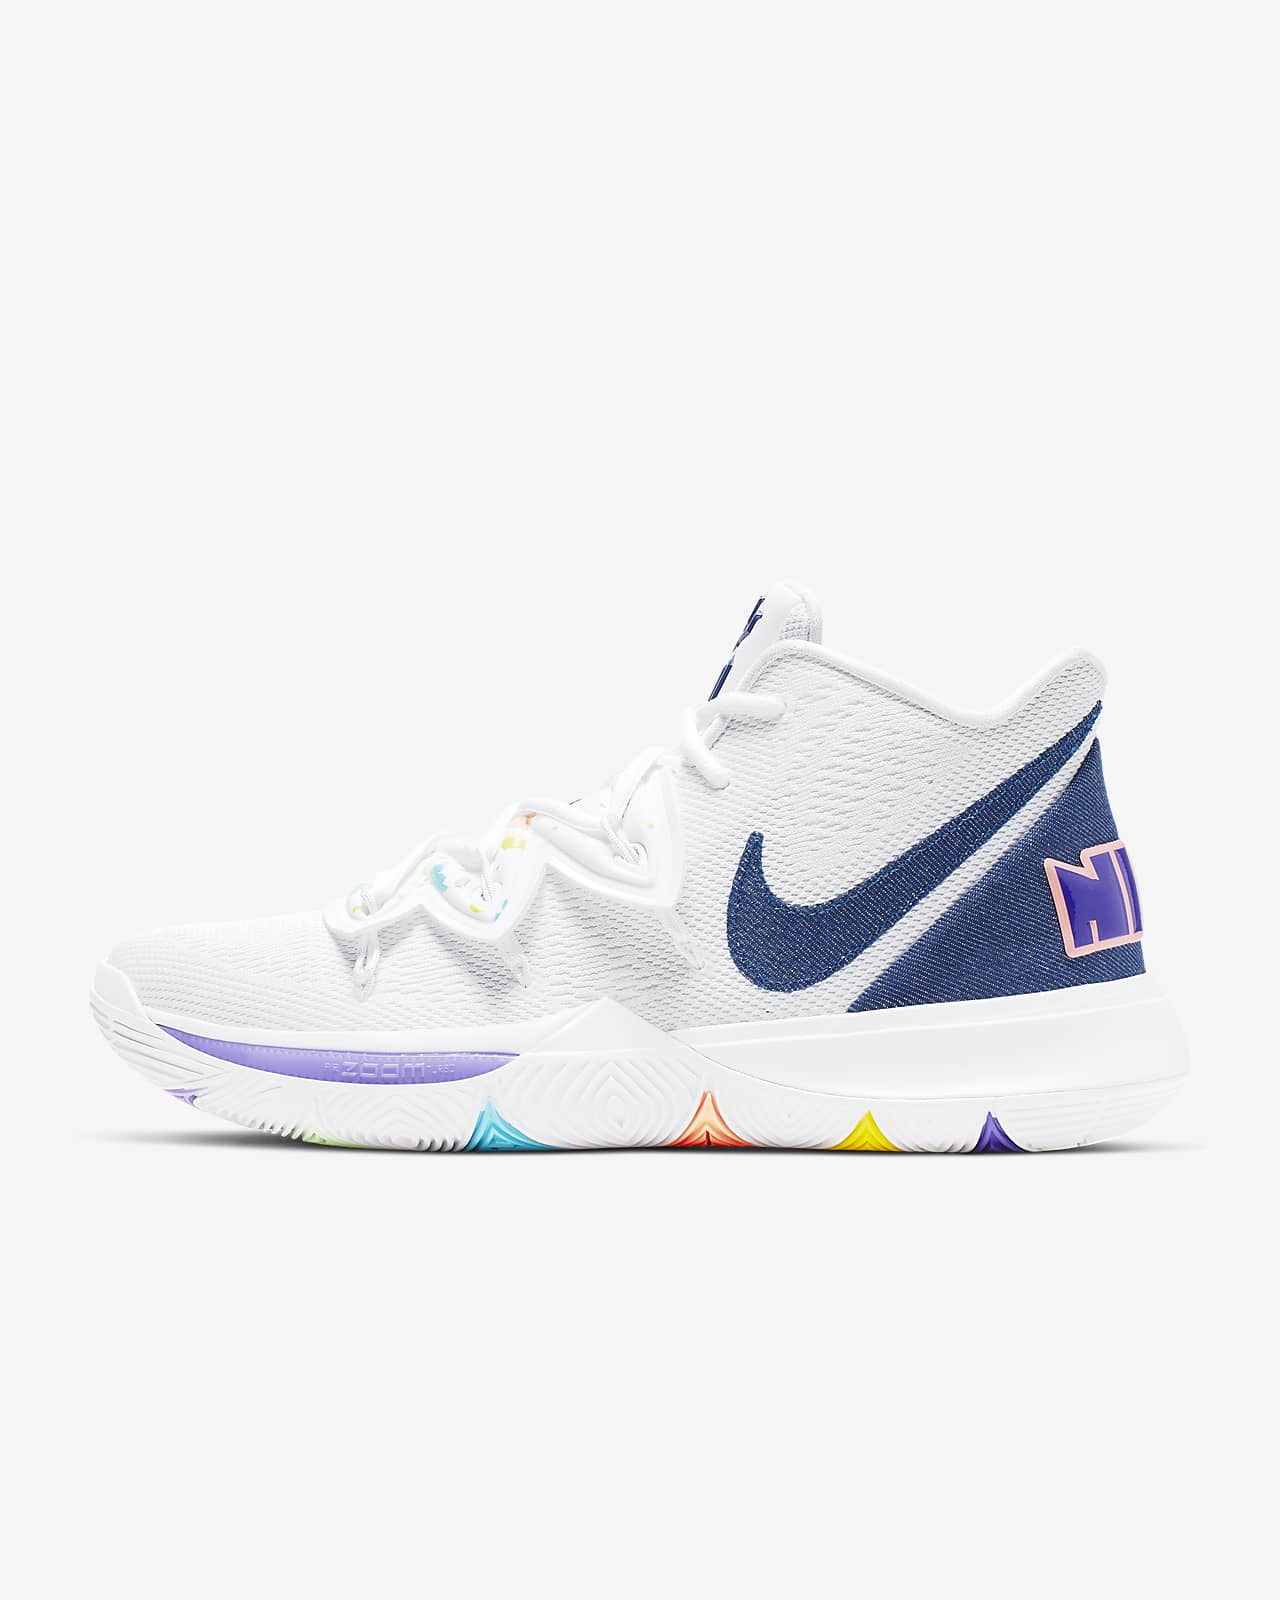 Kyrie 5 Nike By You Outlet, Save 55%.